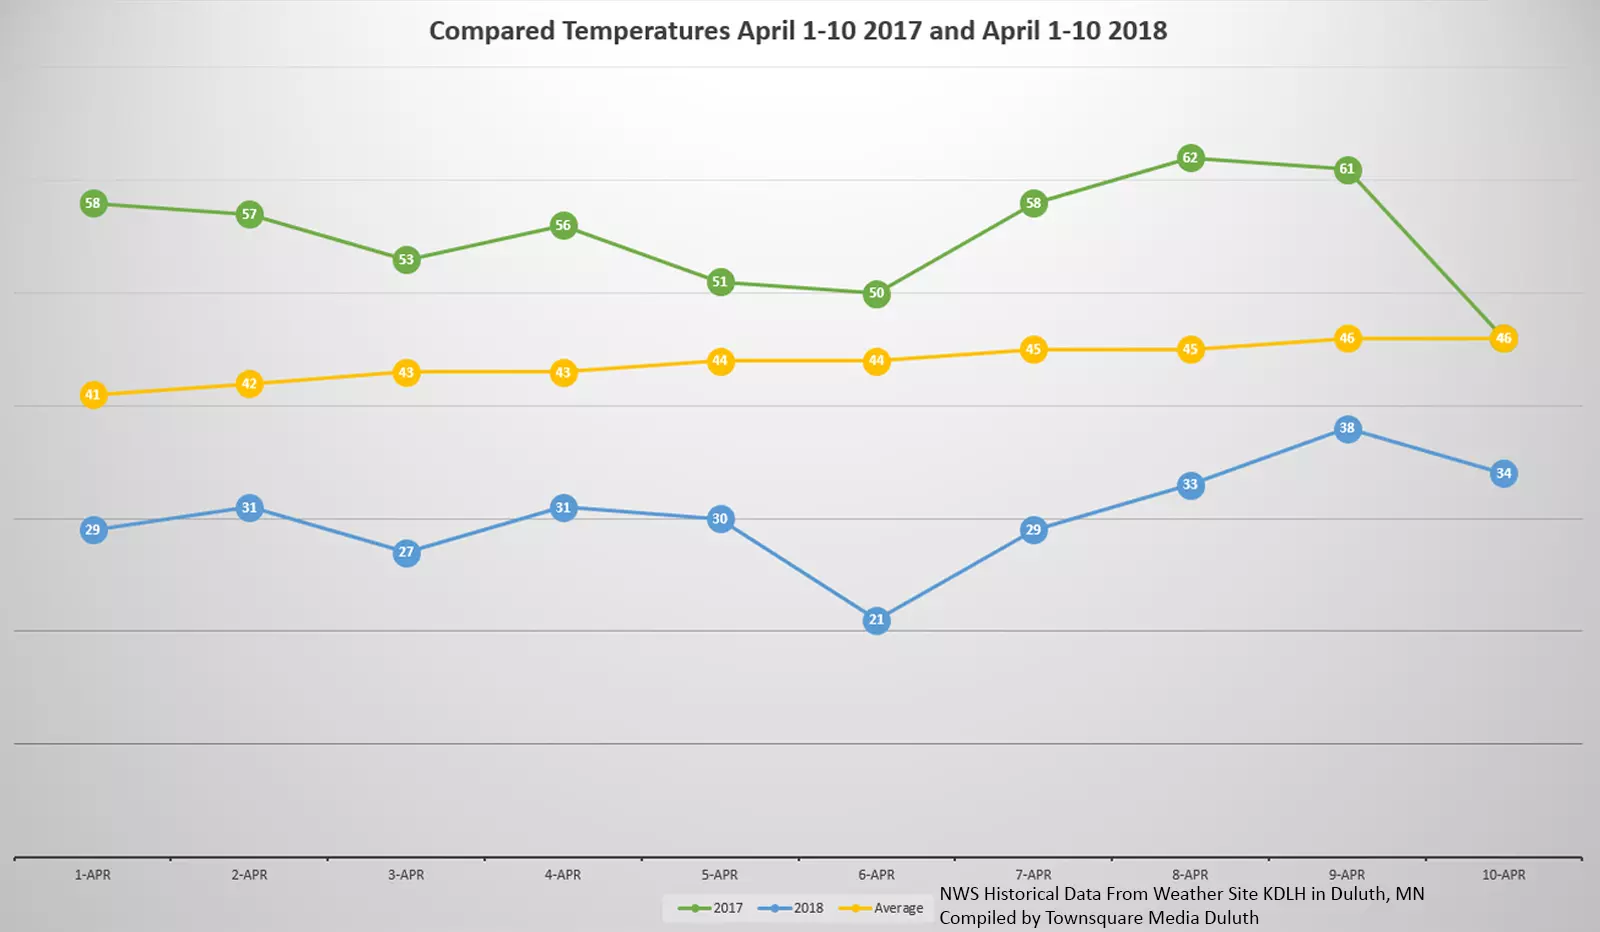 How Much Colder Has April 2018 Been Than April 2017 in Duluth?